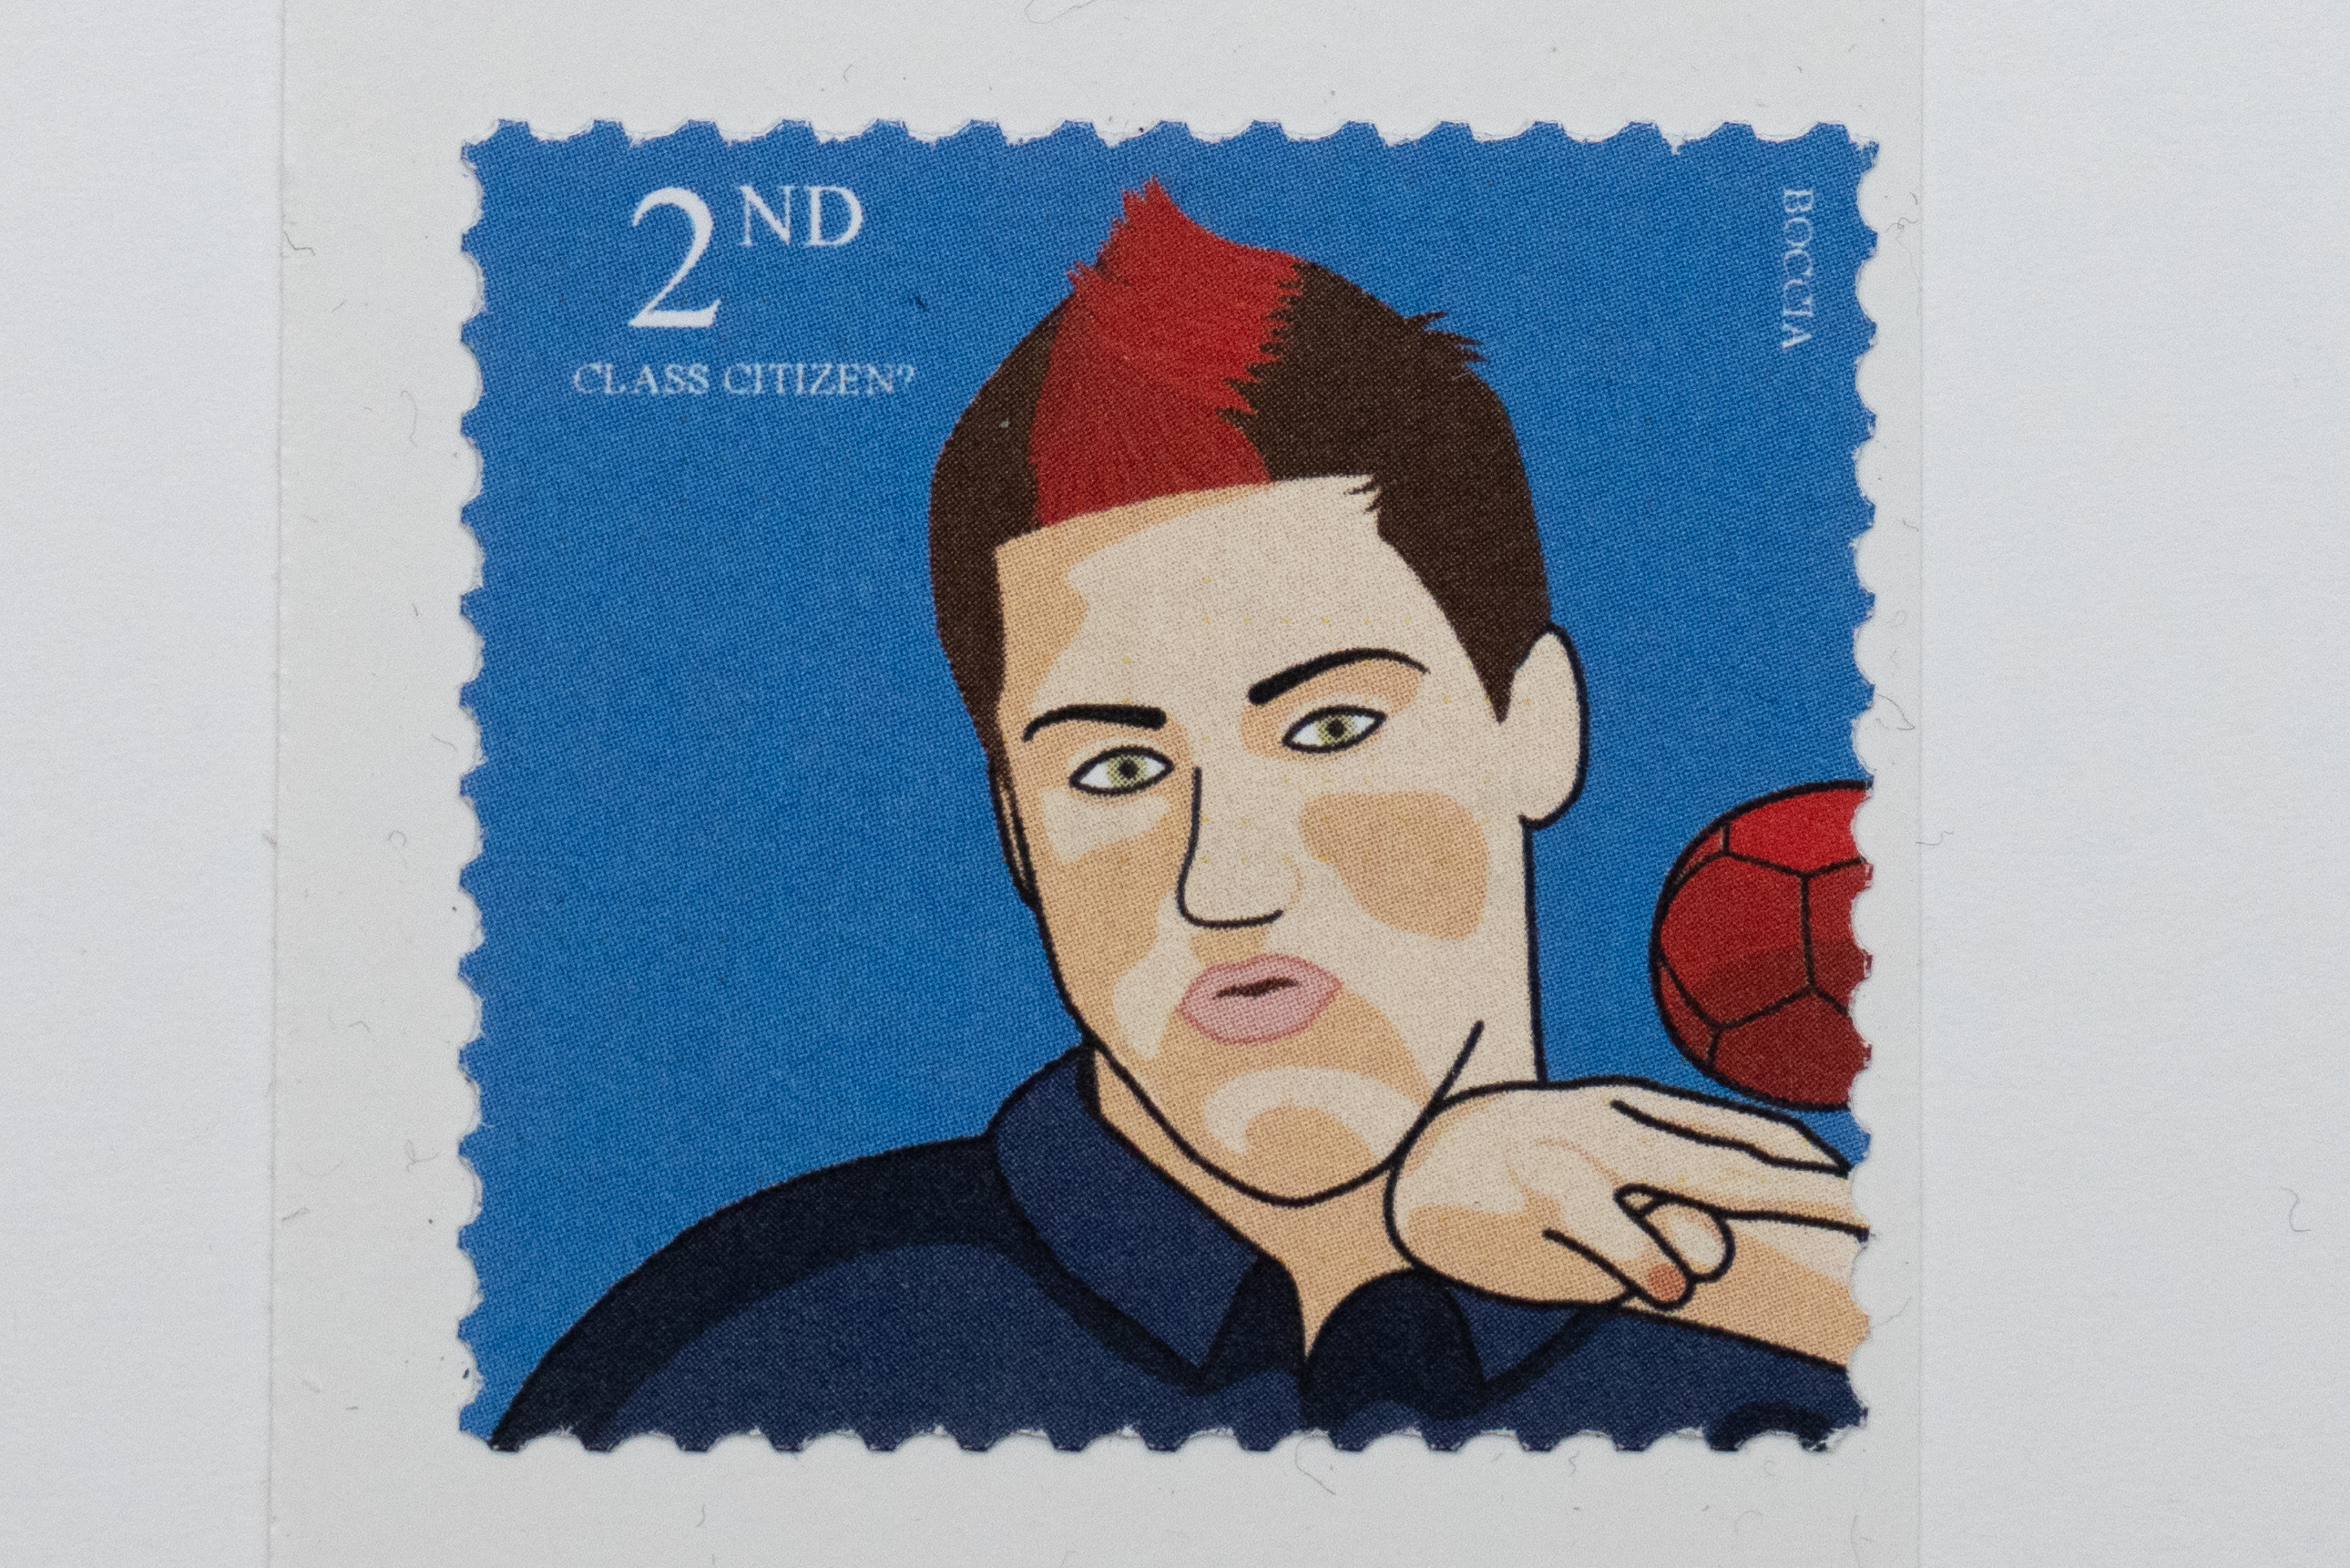 Boccia player David Smith MBE features on one of the mock stamps